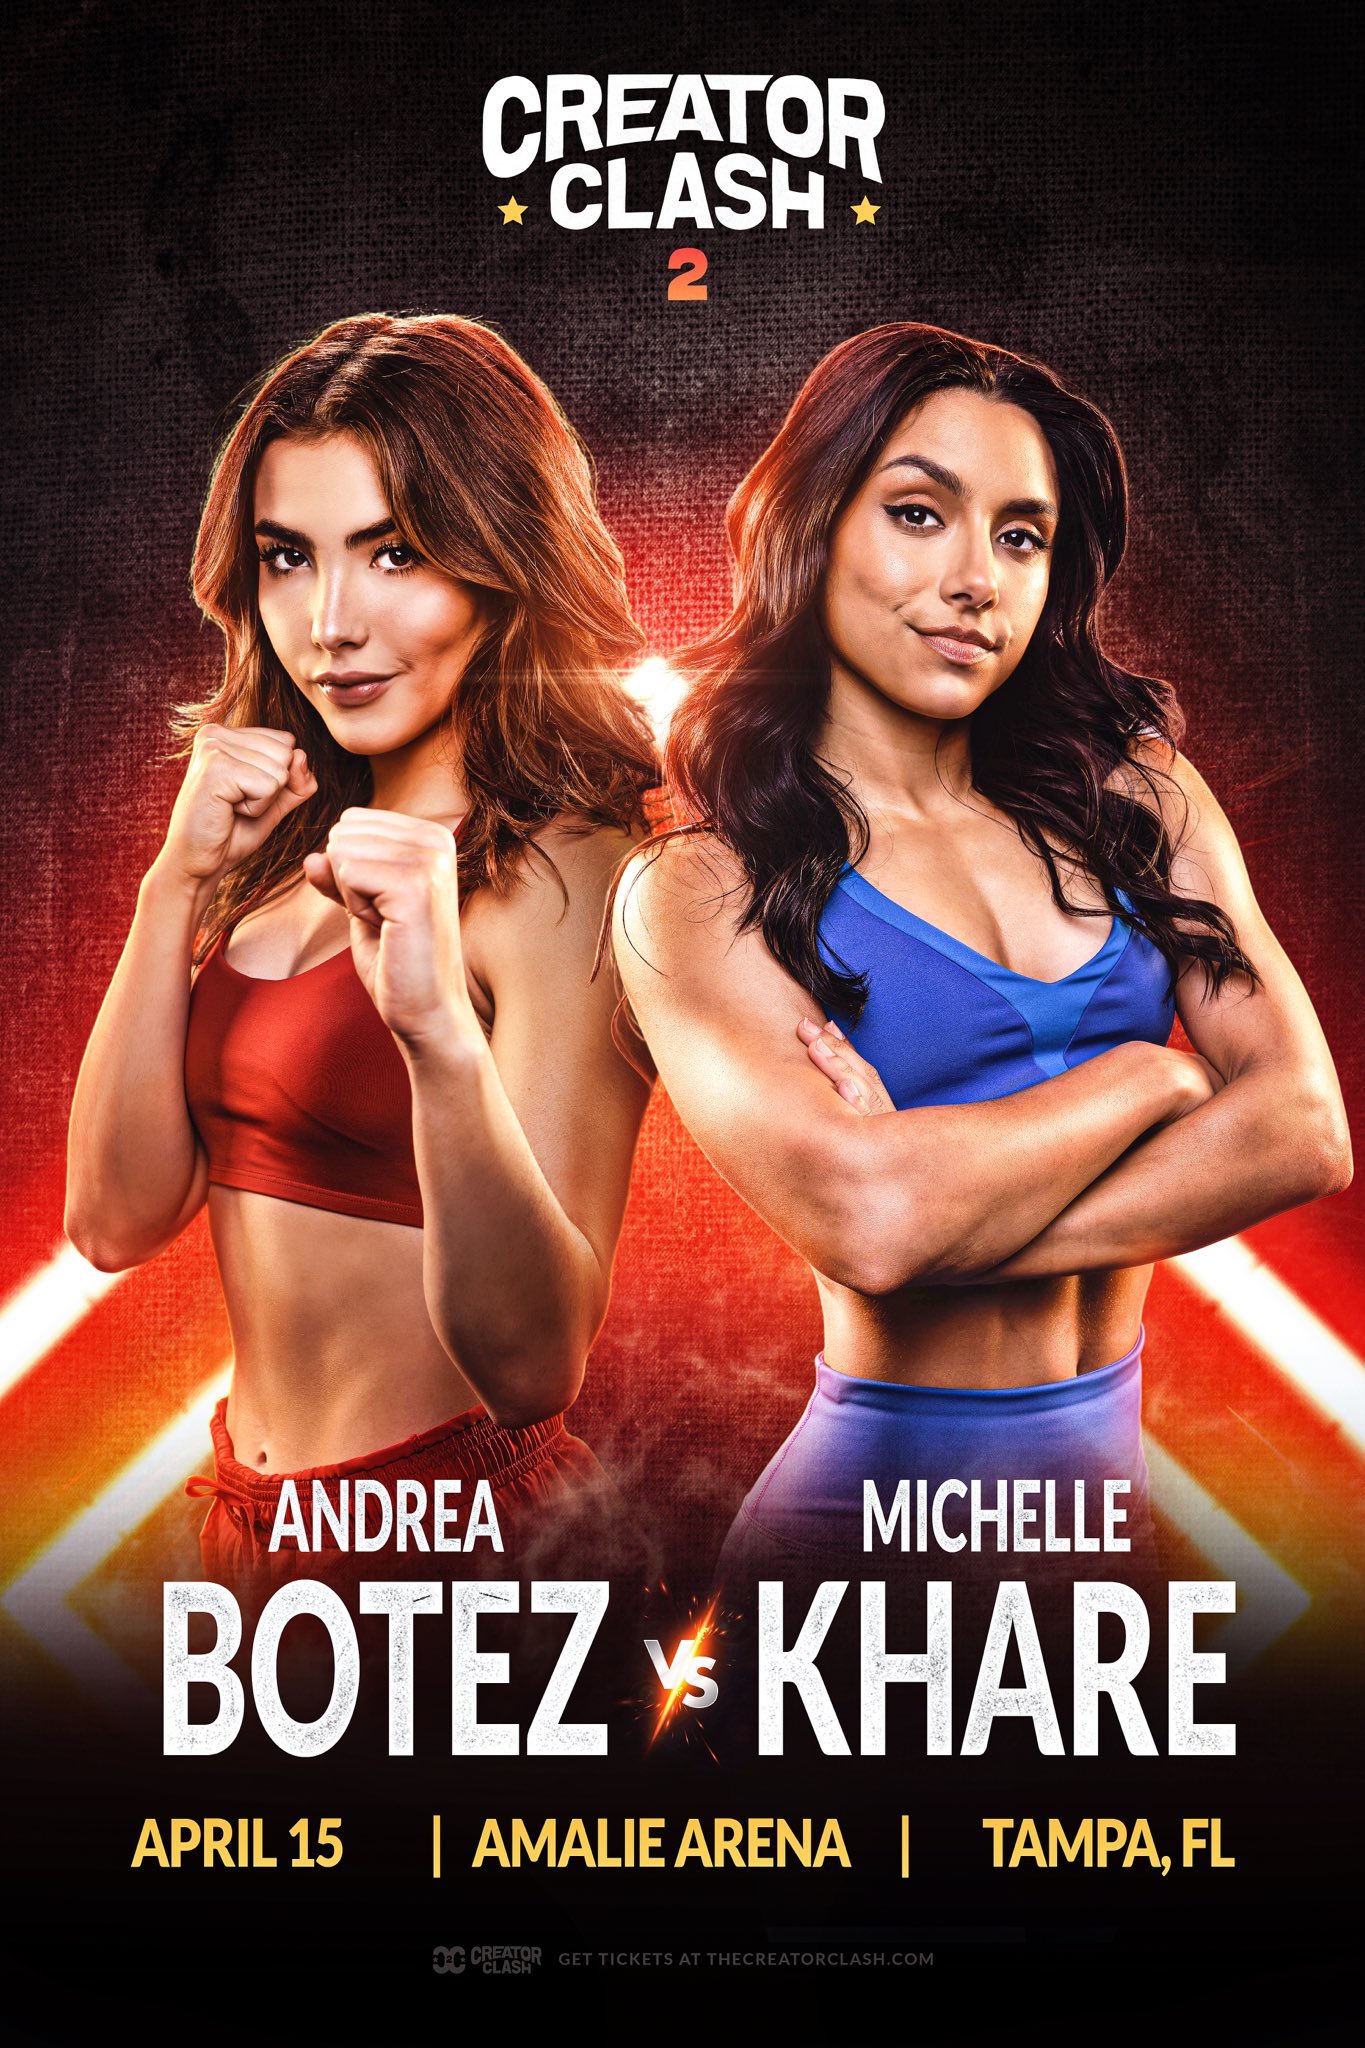 Dexerto on X: Michelle Khare got the win against Andrea Botez at Creator  Clash 2  / X